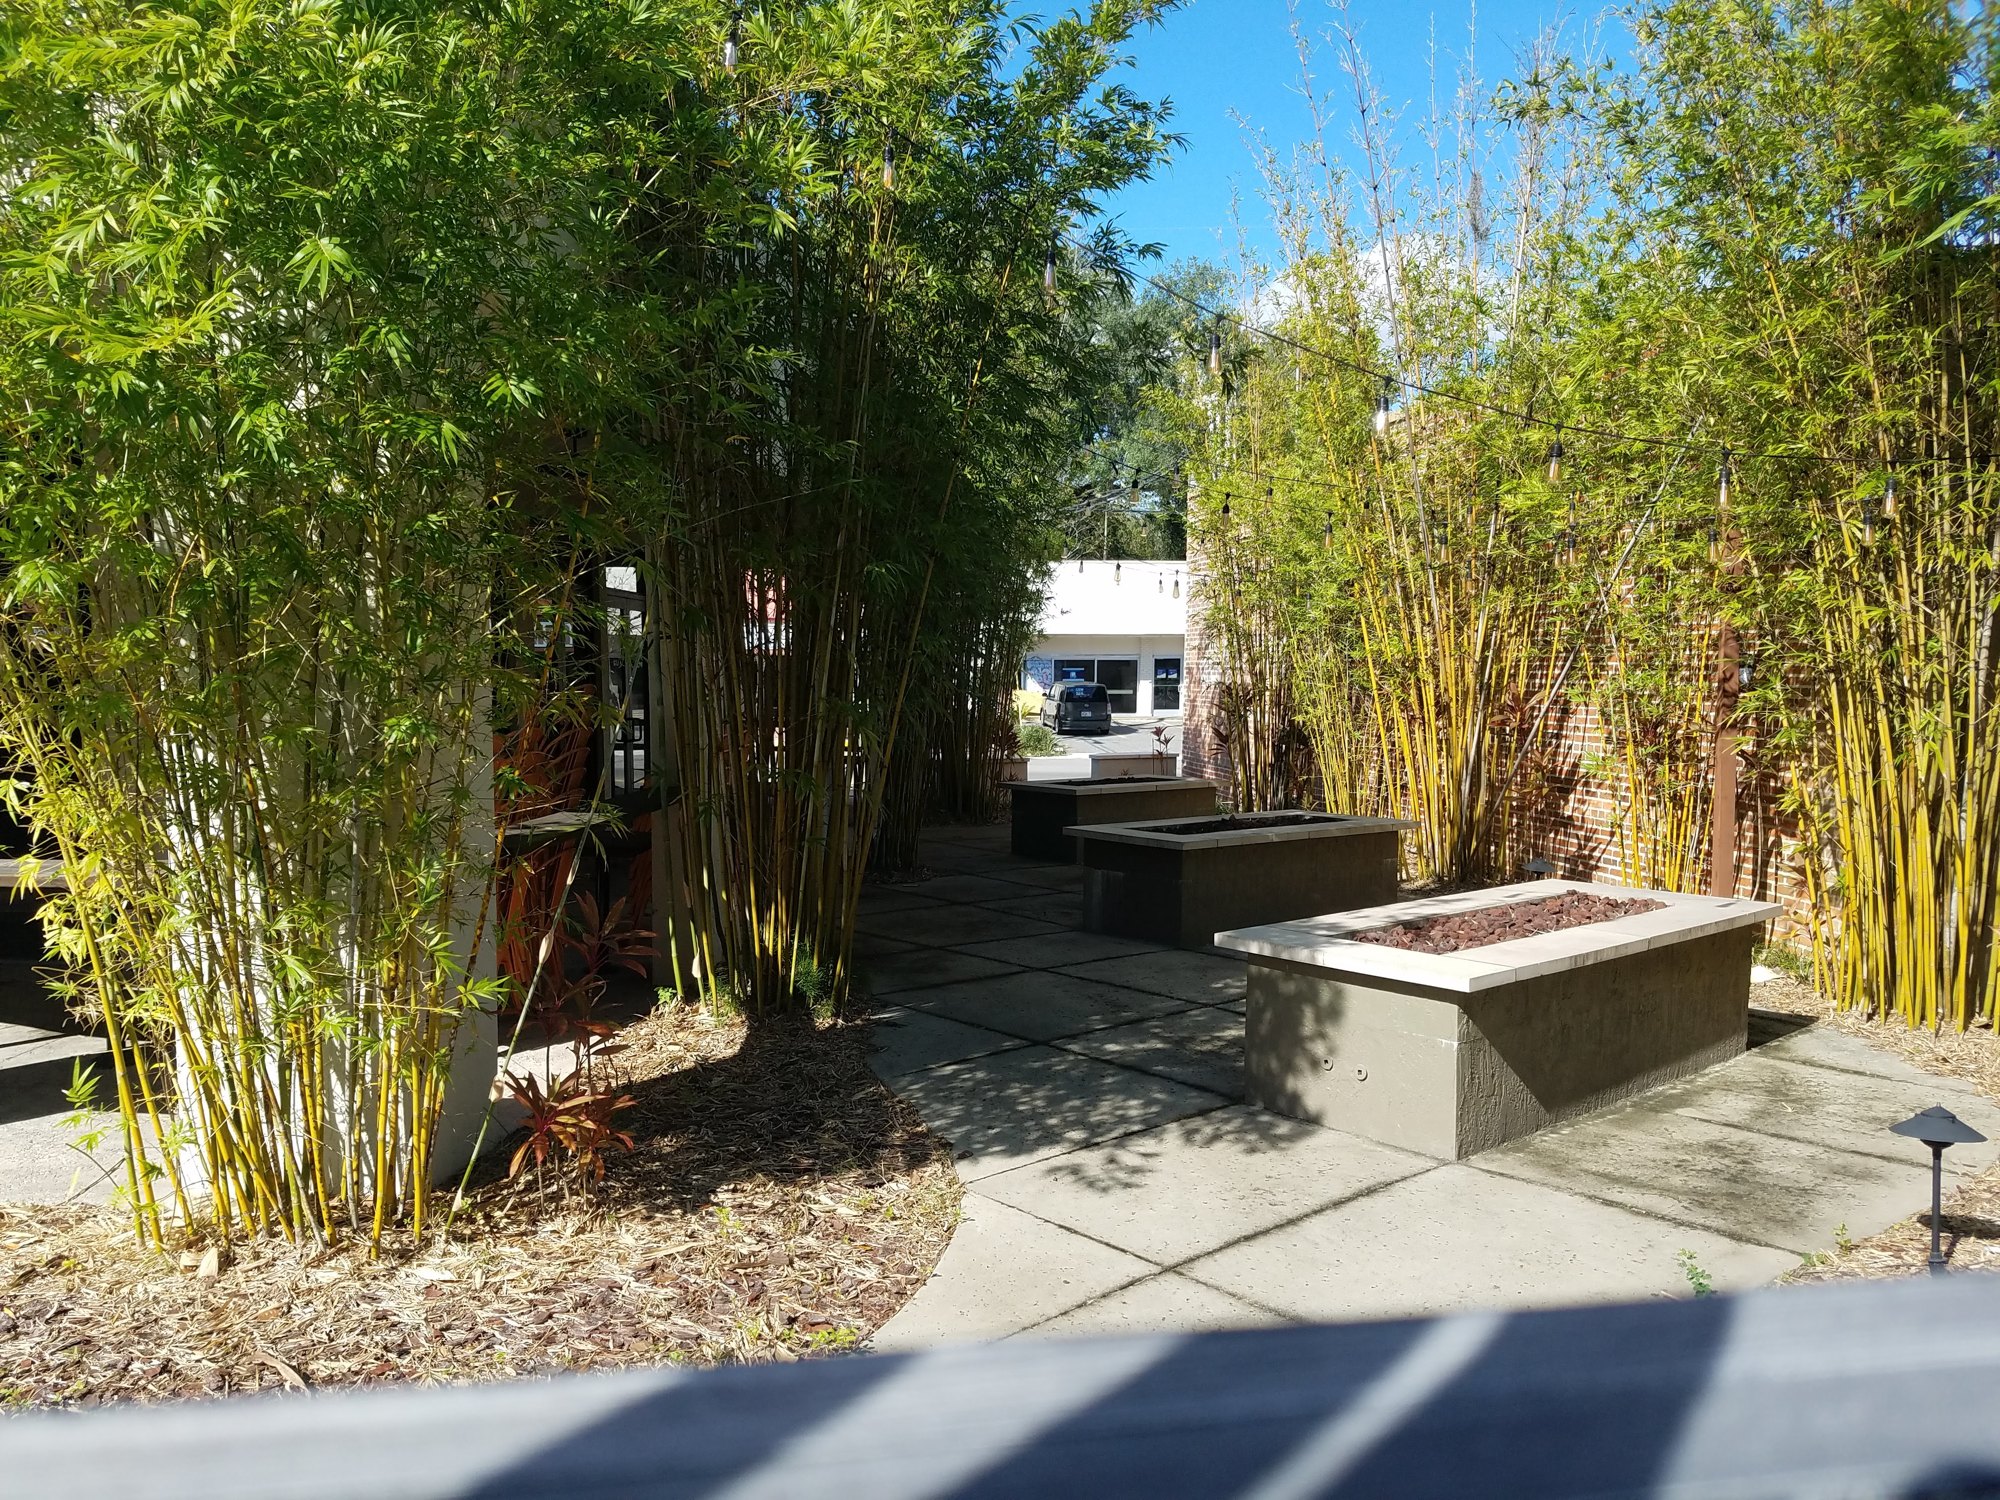 The outdoor patio area at South Kitchen & Spirits features bamboo landscaping.